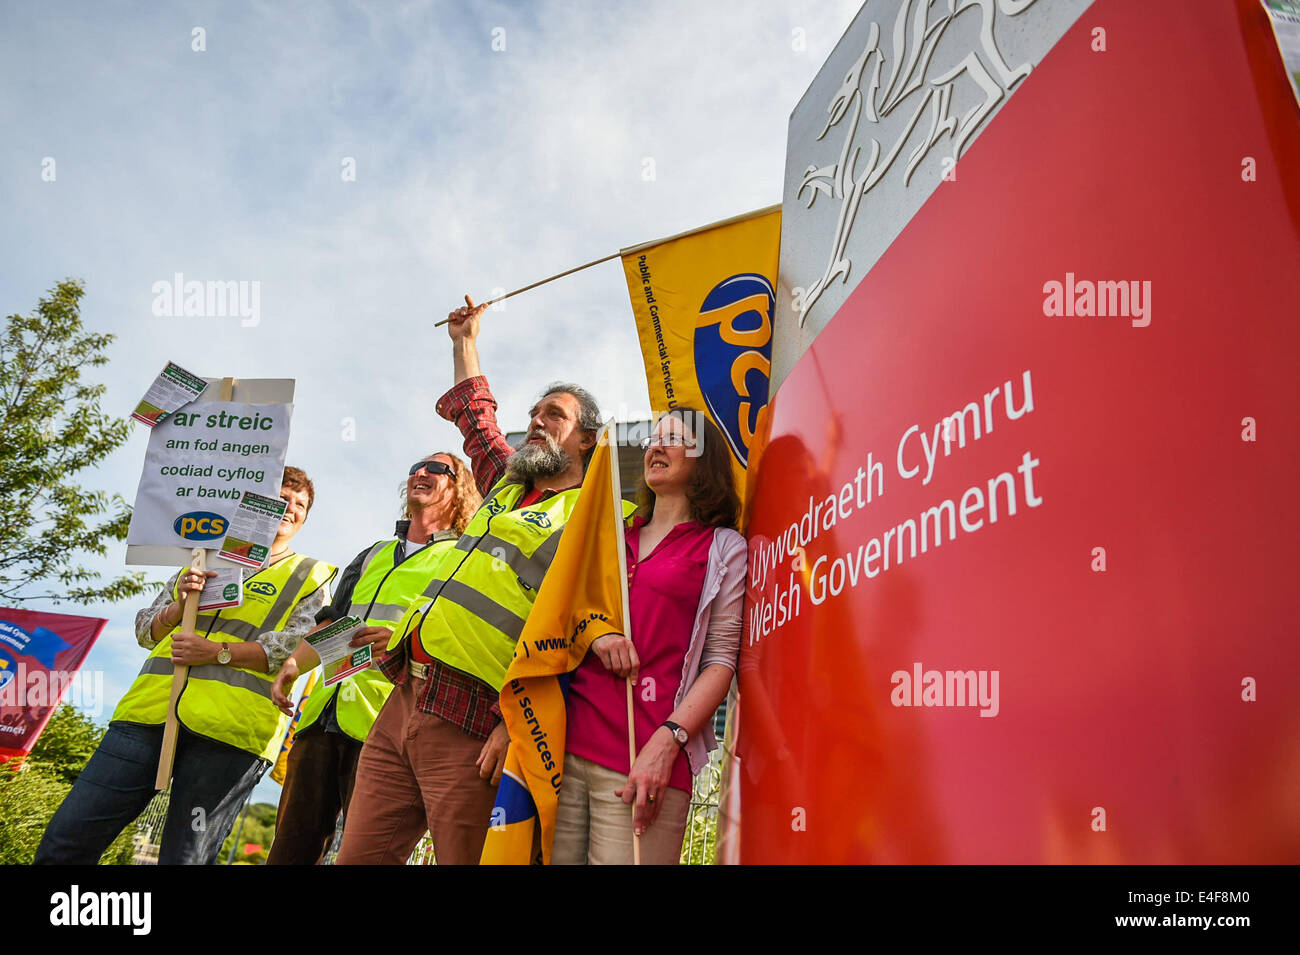 Aberystwyth, Wales, UK. 10th July 2014. Members of public sector unions picketing outside the offices of the Welsh Government in Aberystwyth Wales UK. Over a million union members across the UK are expected to take industrial action today over their claims for fair pay and pension rights Credit:  keith morris/Alamy Live News Stock Photo